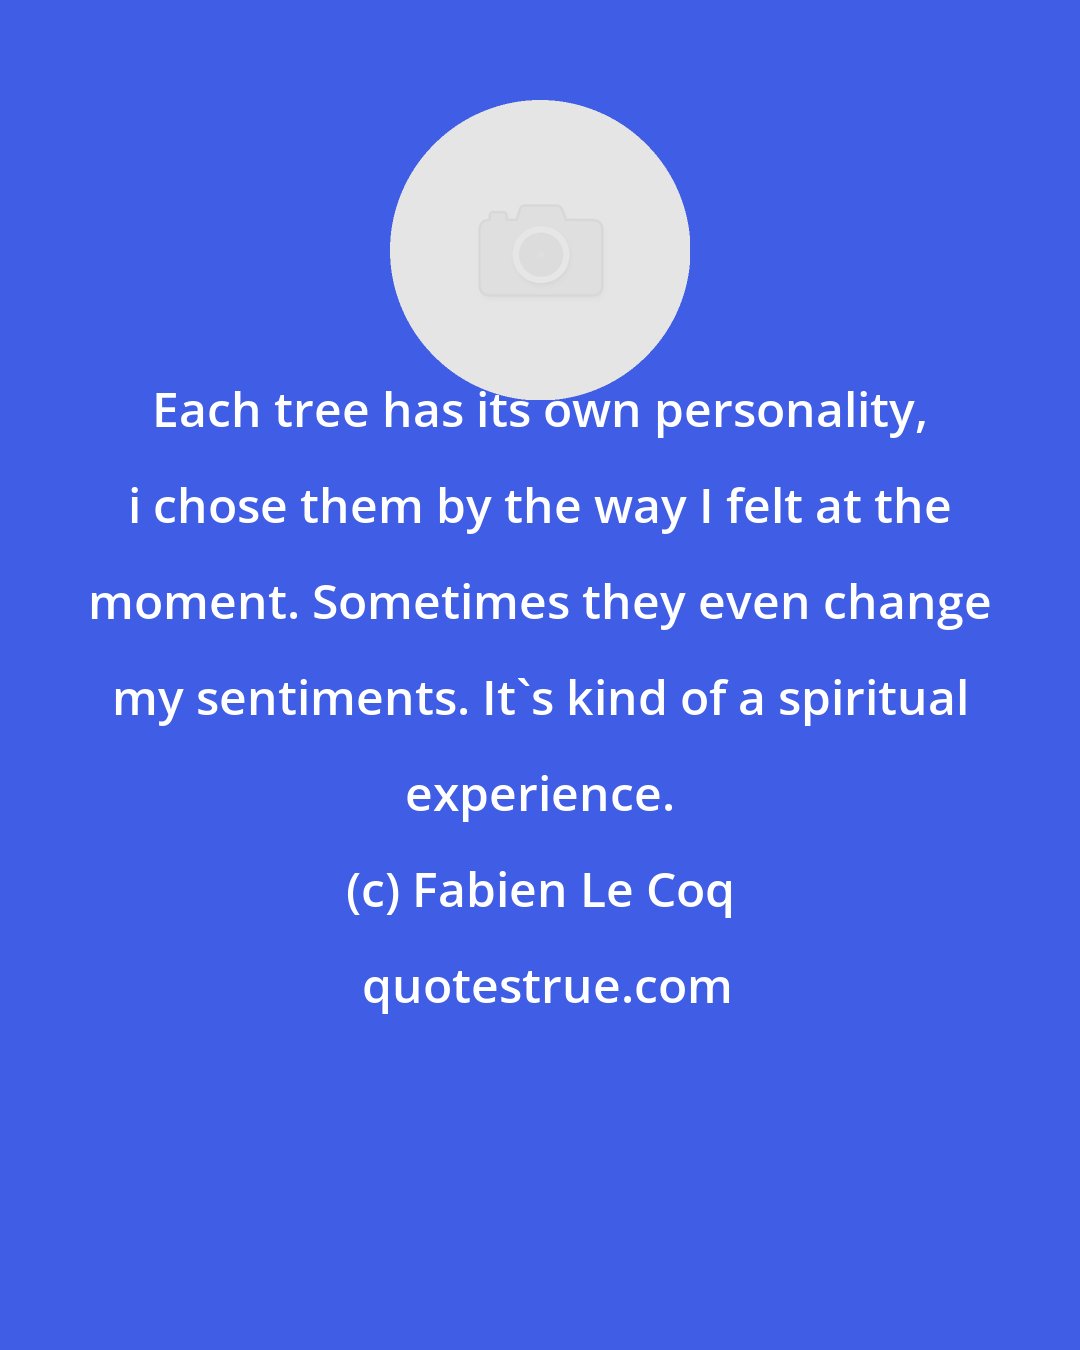 Fabien Le Coq: Each tree has its own personality, i chose them by the way I felt at the moment. Sometimes they even change my sentiments. It's kind of a spiritual experience.